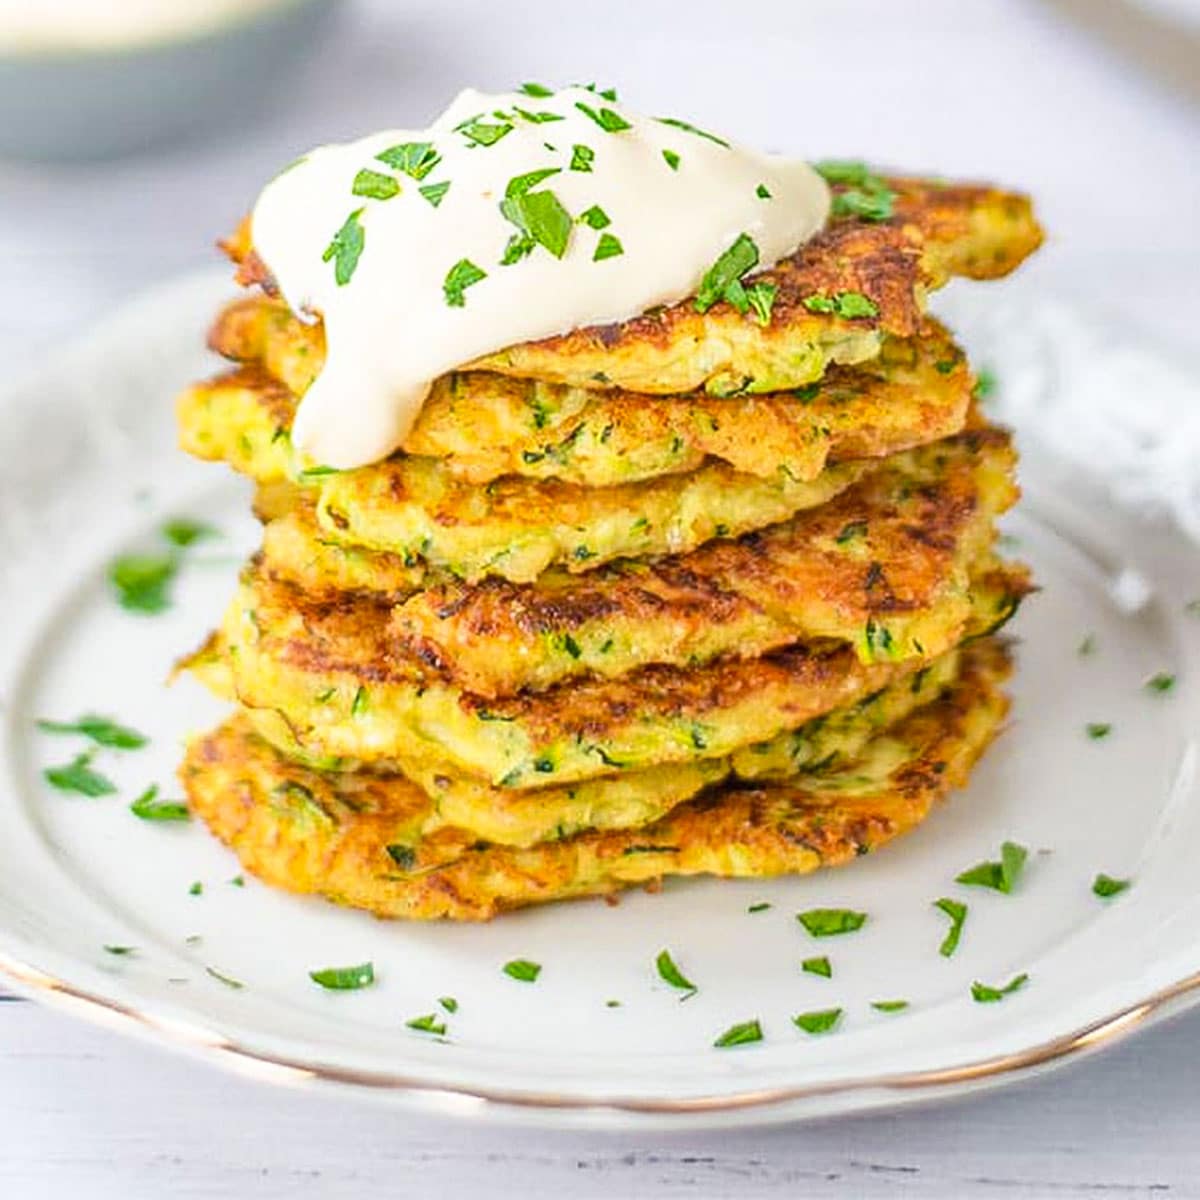 Keto zucchini fritters on a plate with sour cream.